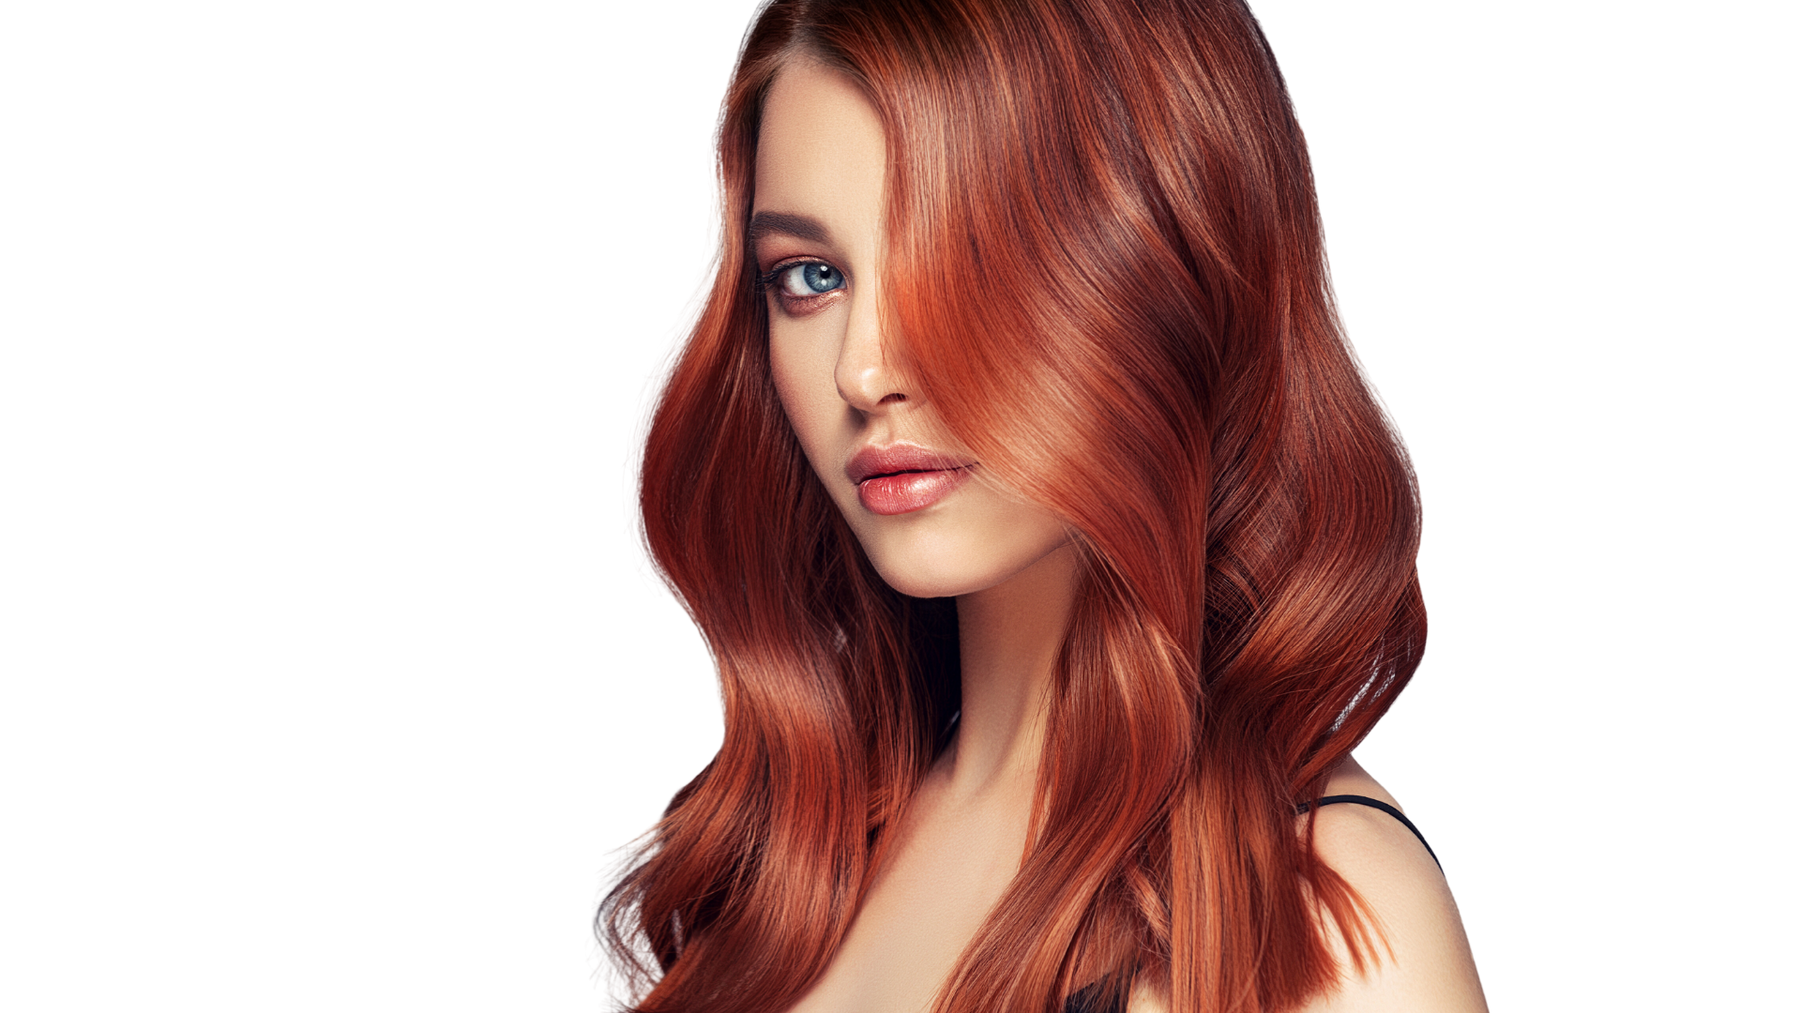 How to choose the right hair color